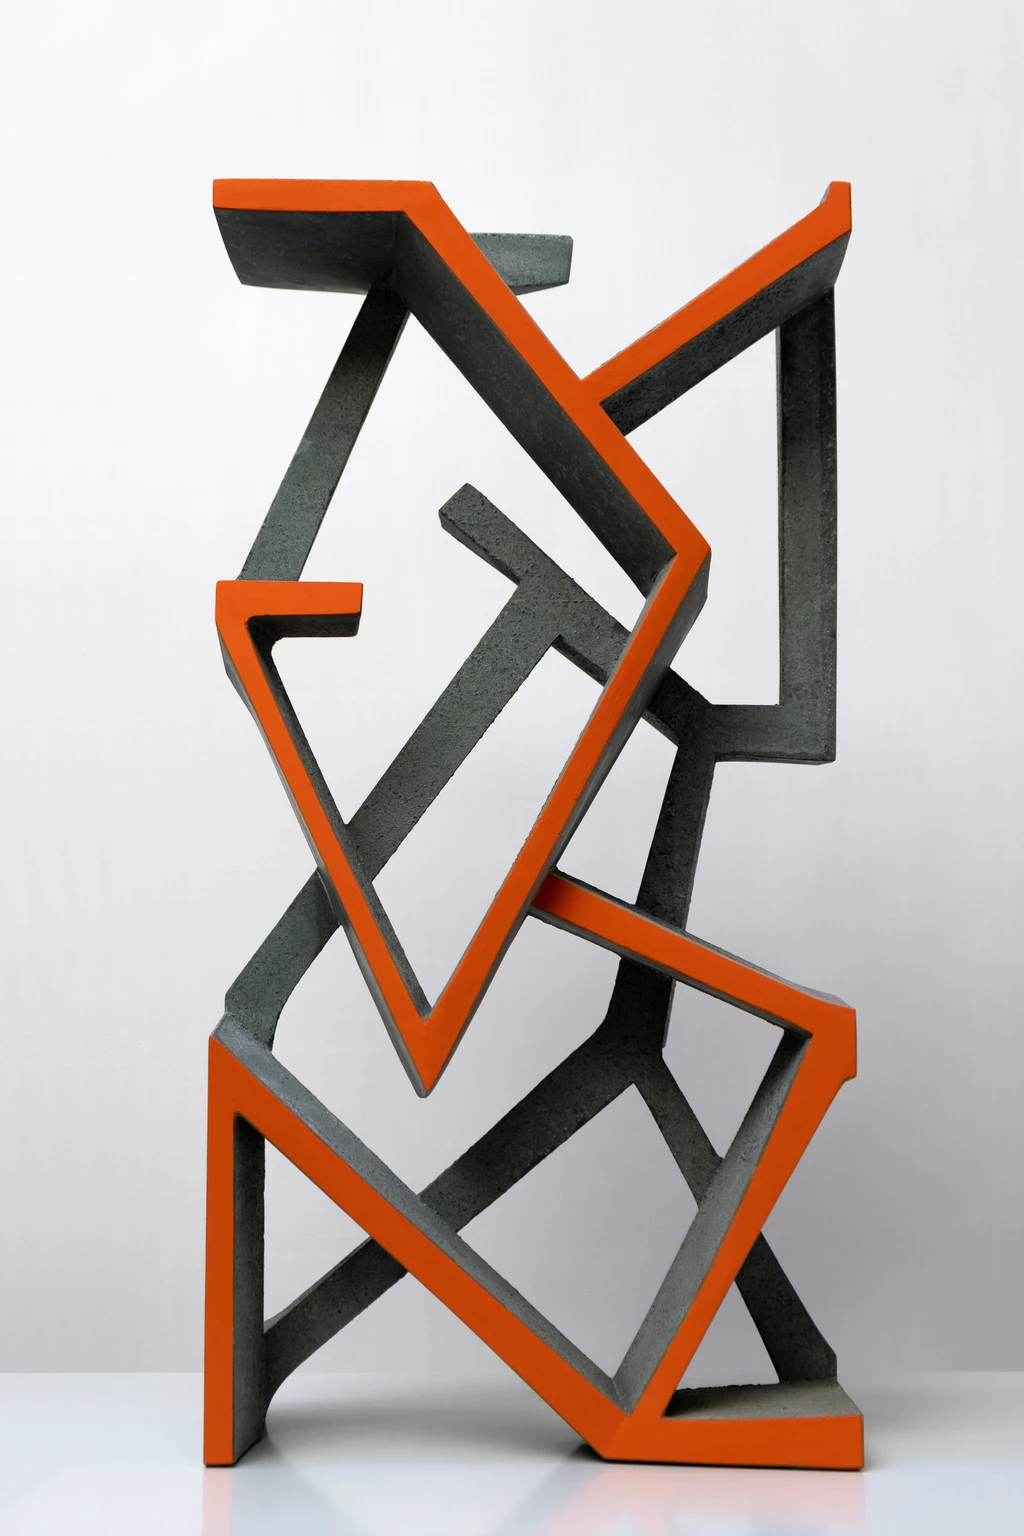 Biner 13., 2020 - colored and painted concrete, 100 x 51 x 32 cm